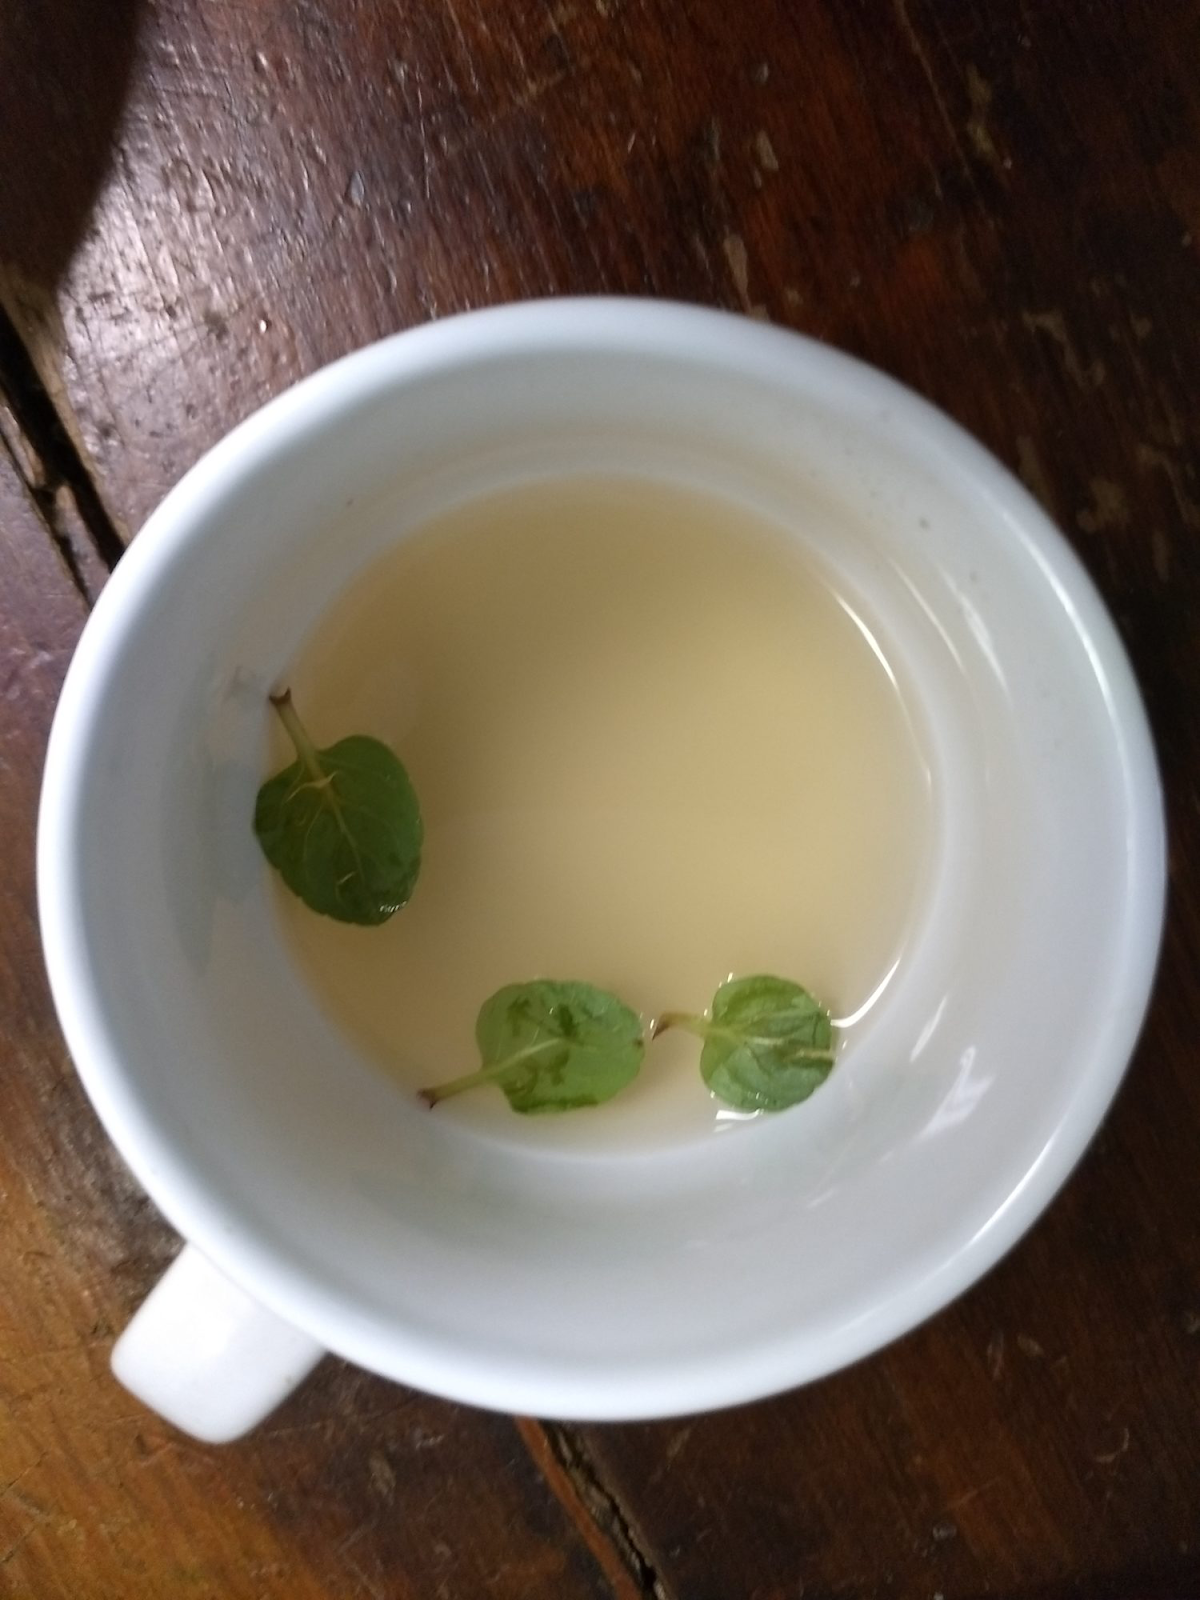 A cup of liquid with leaves in it  Description automatically generated